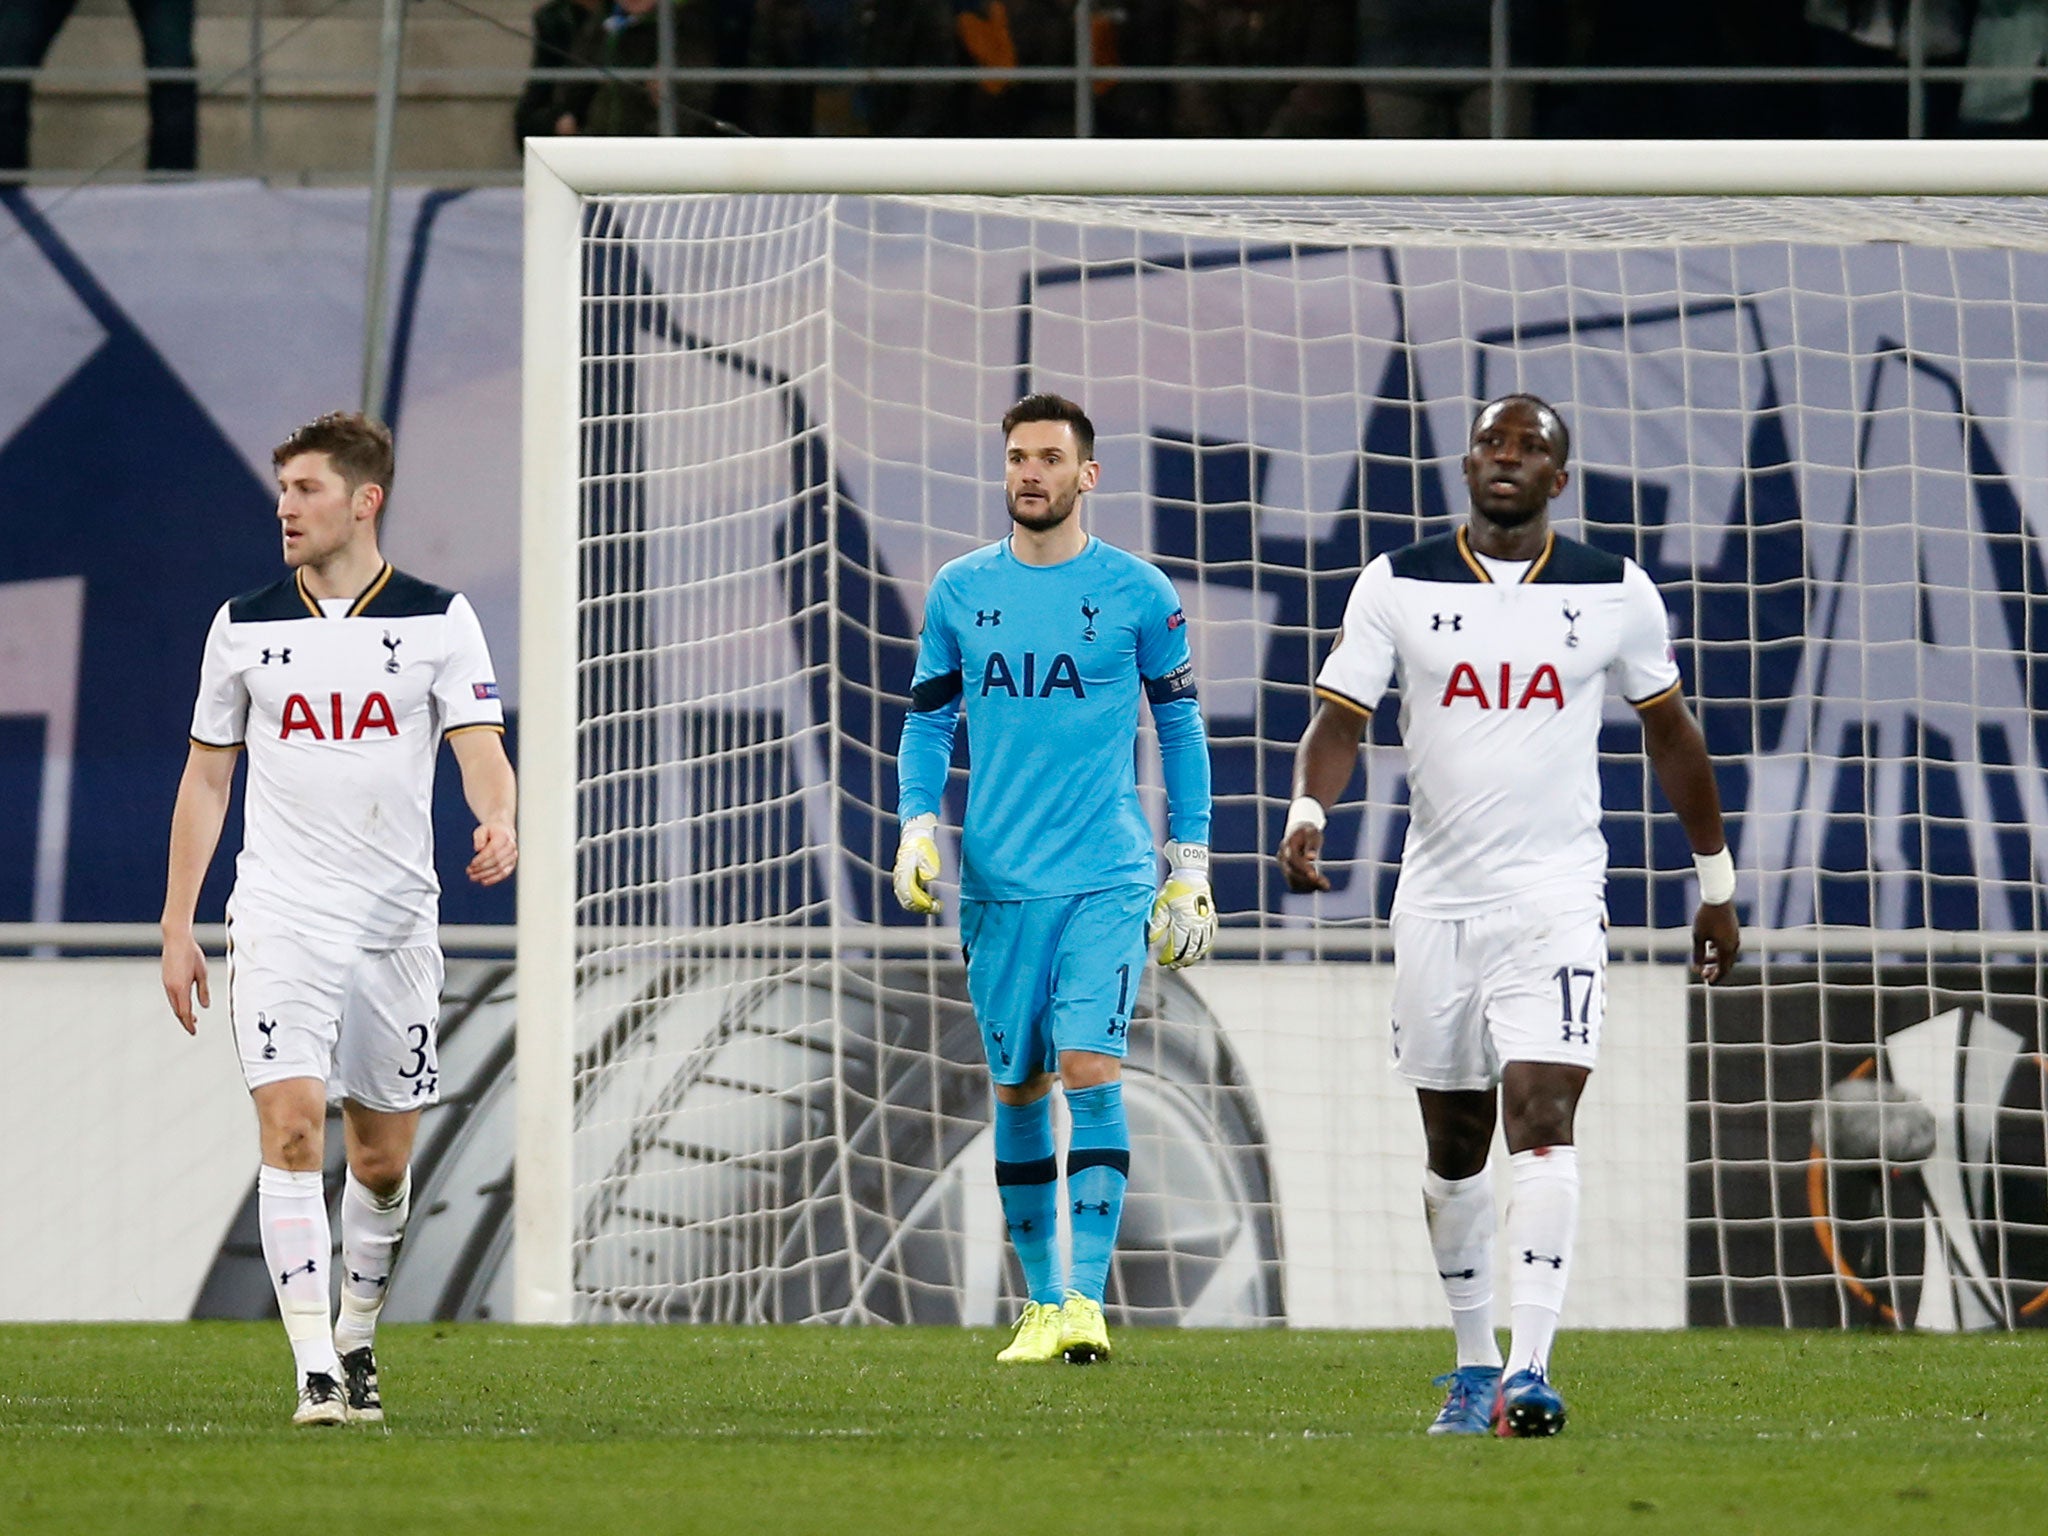 Tottenham have now suffered back-to-back defeats